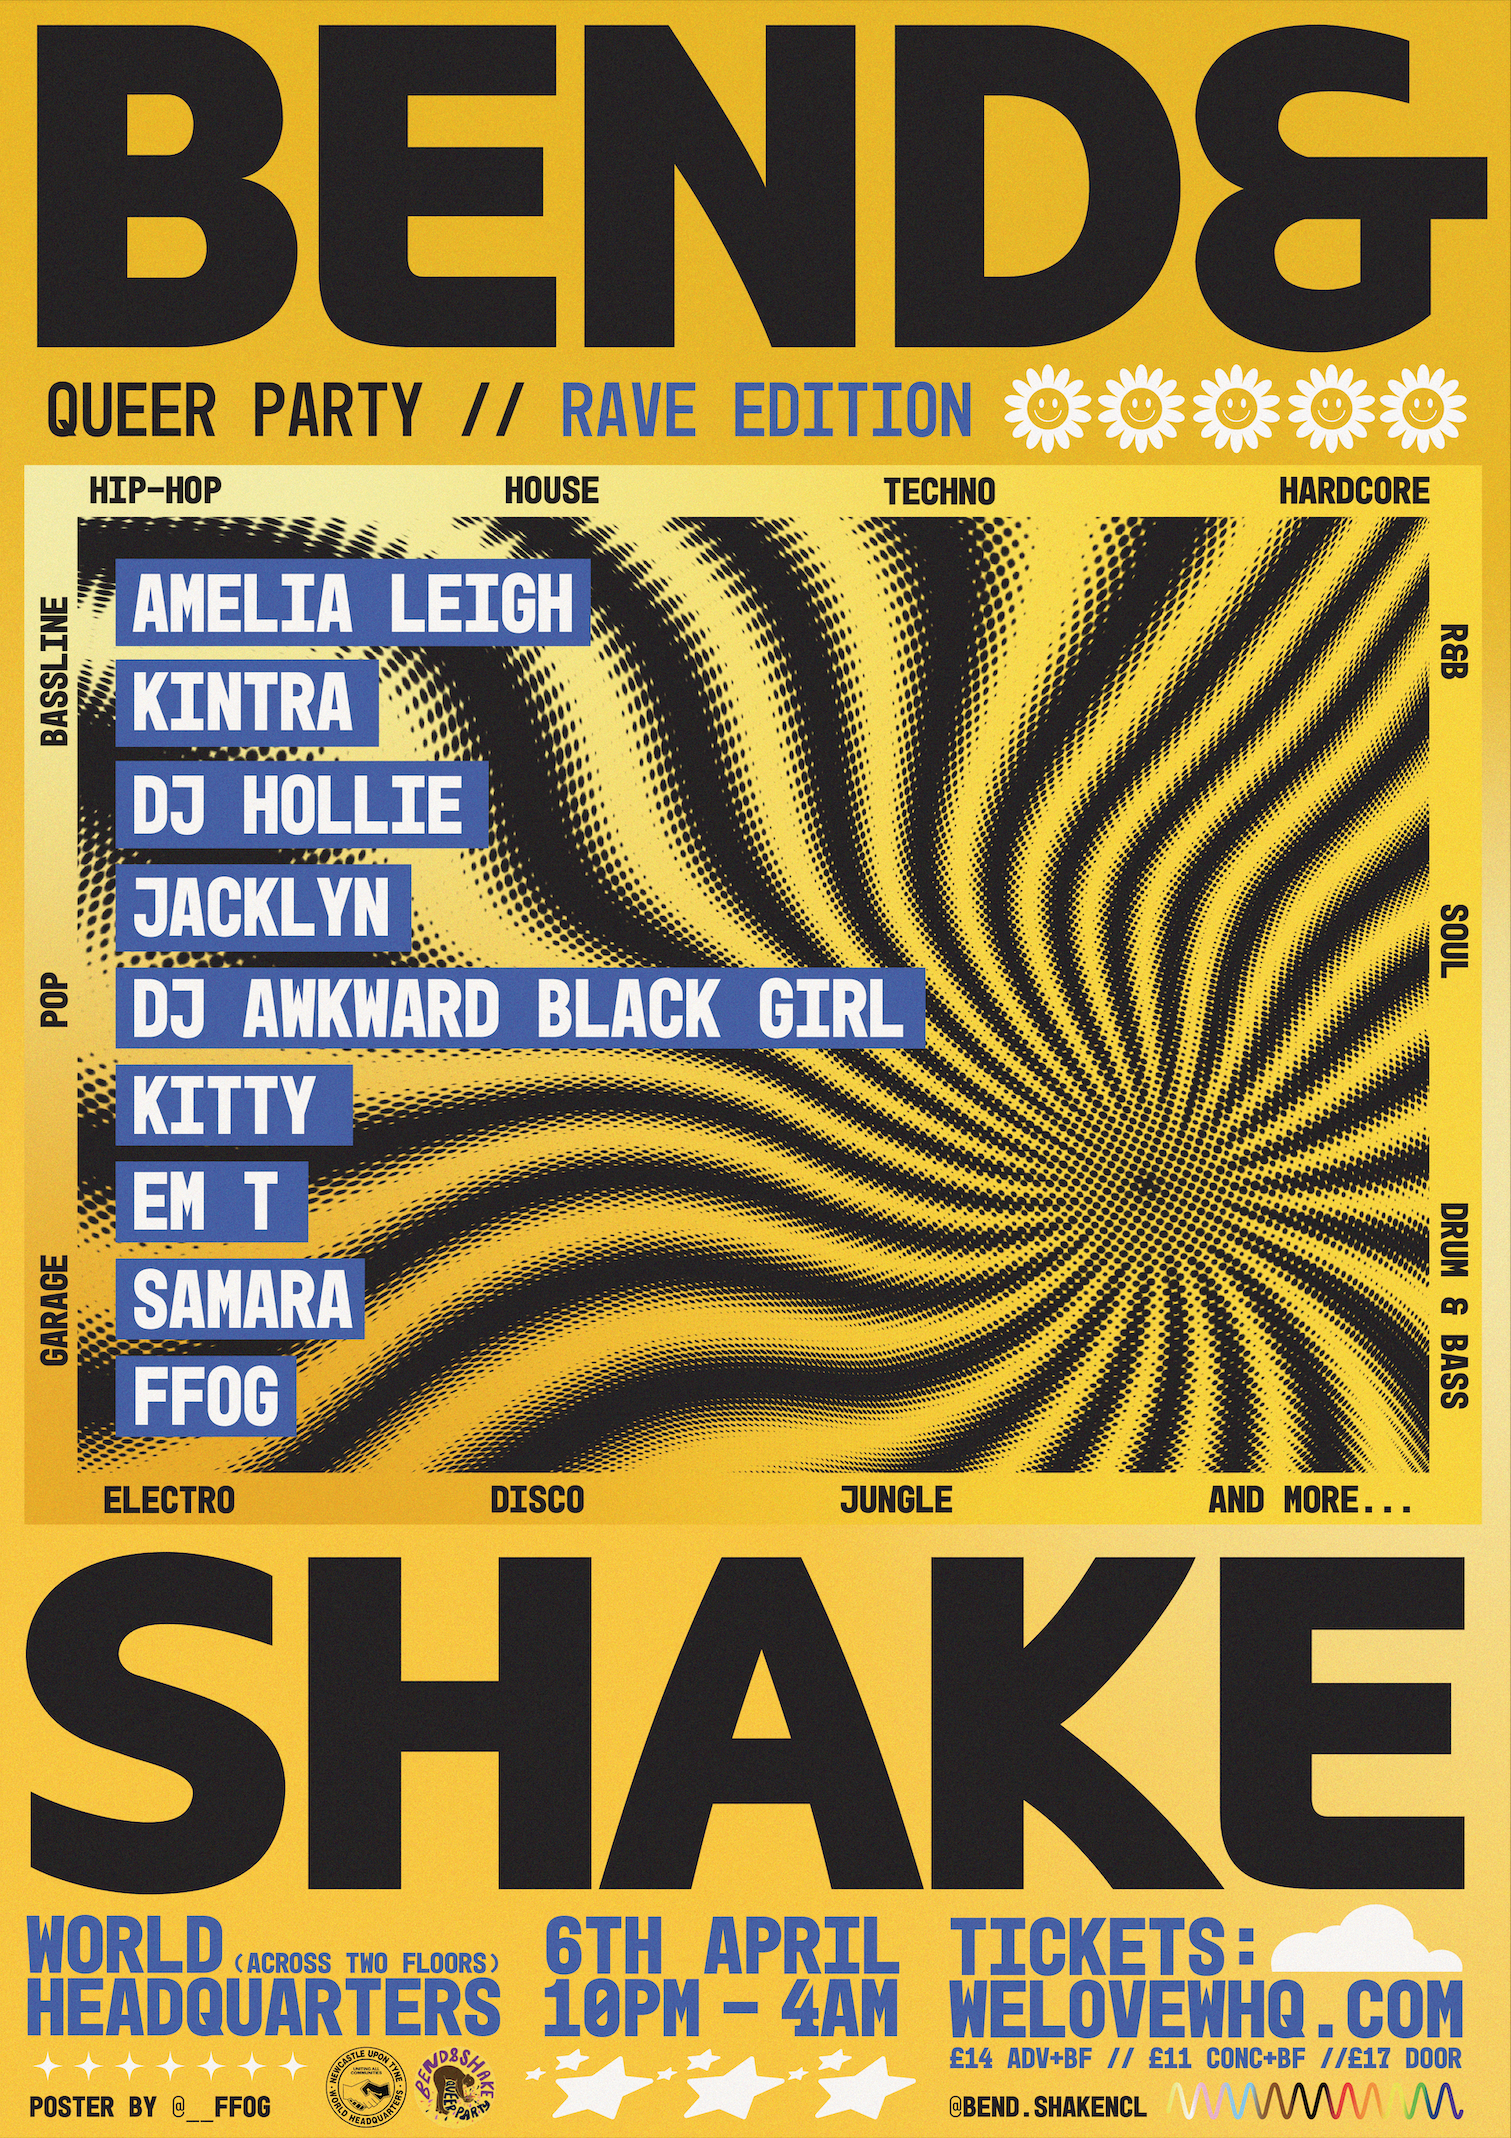 Bend& Shake - Queer Party - Easter Rave Edition - Página frontal